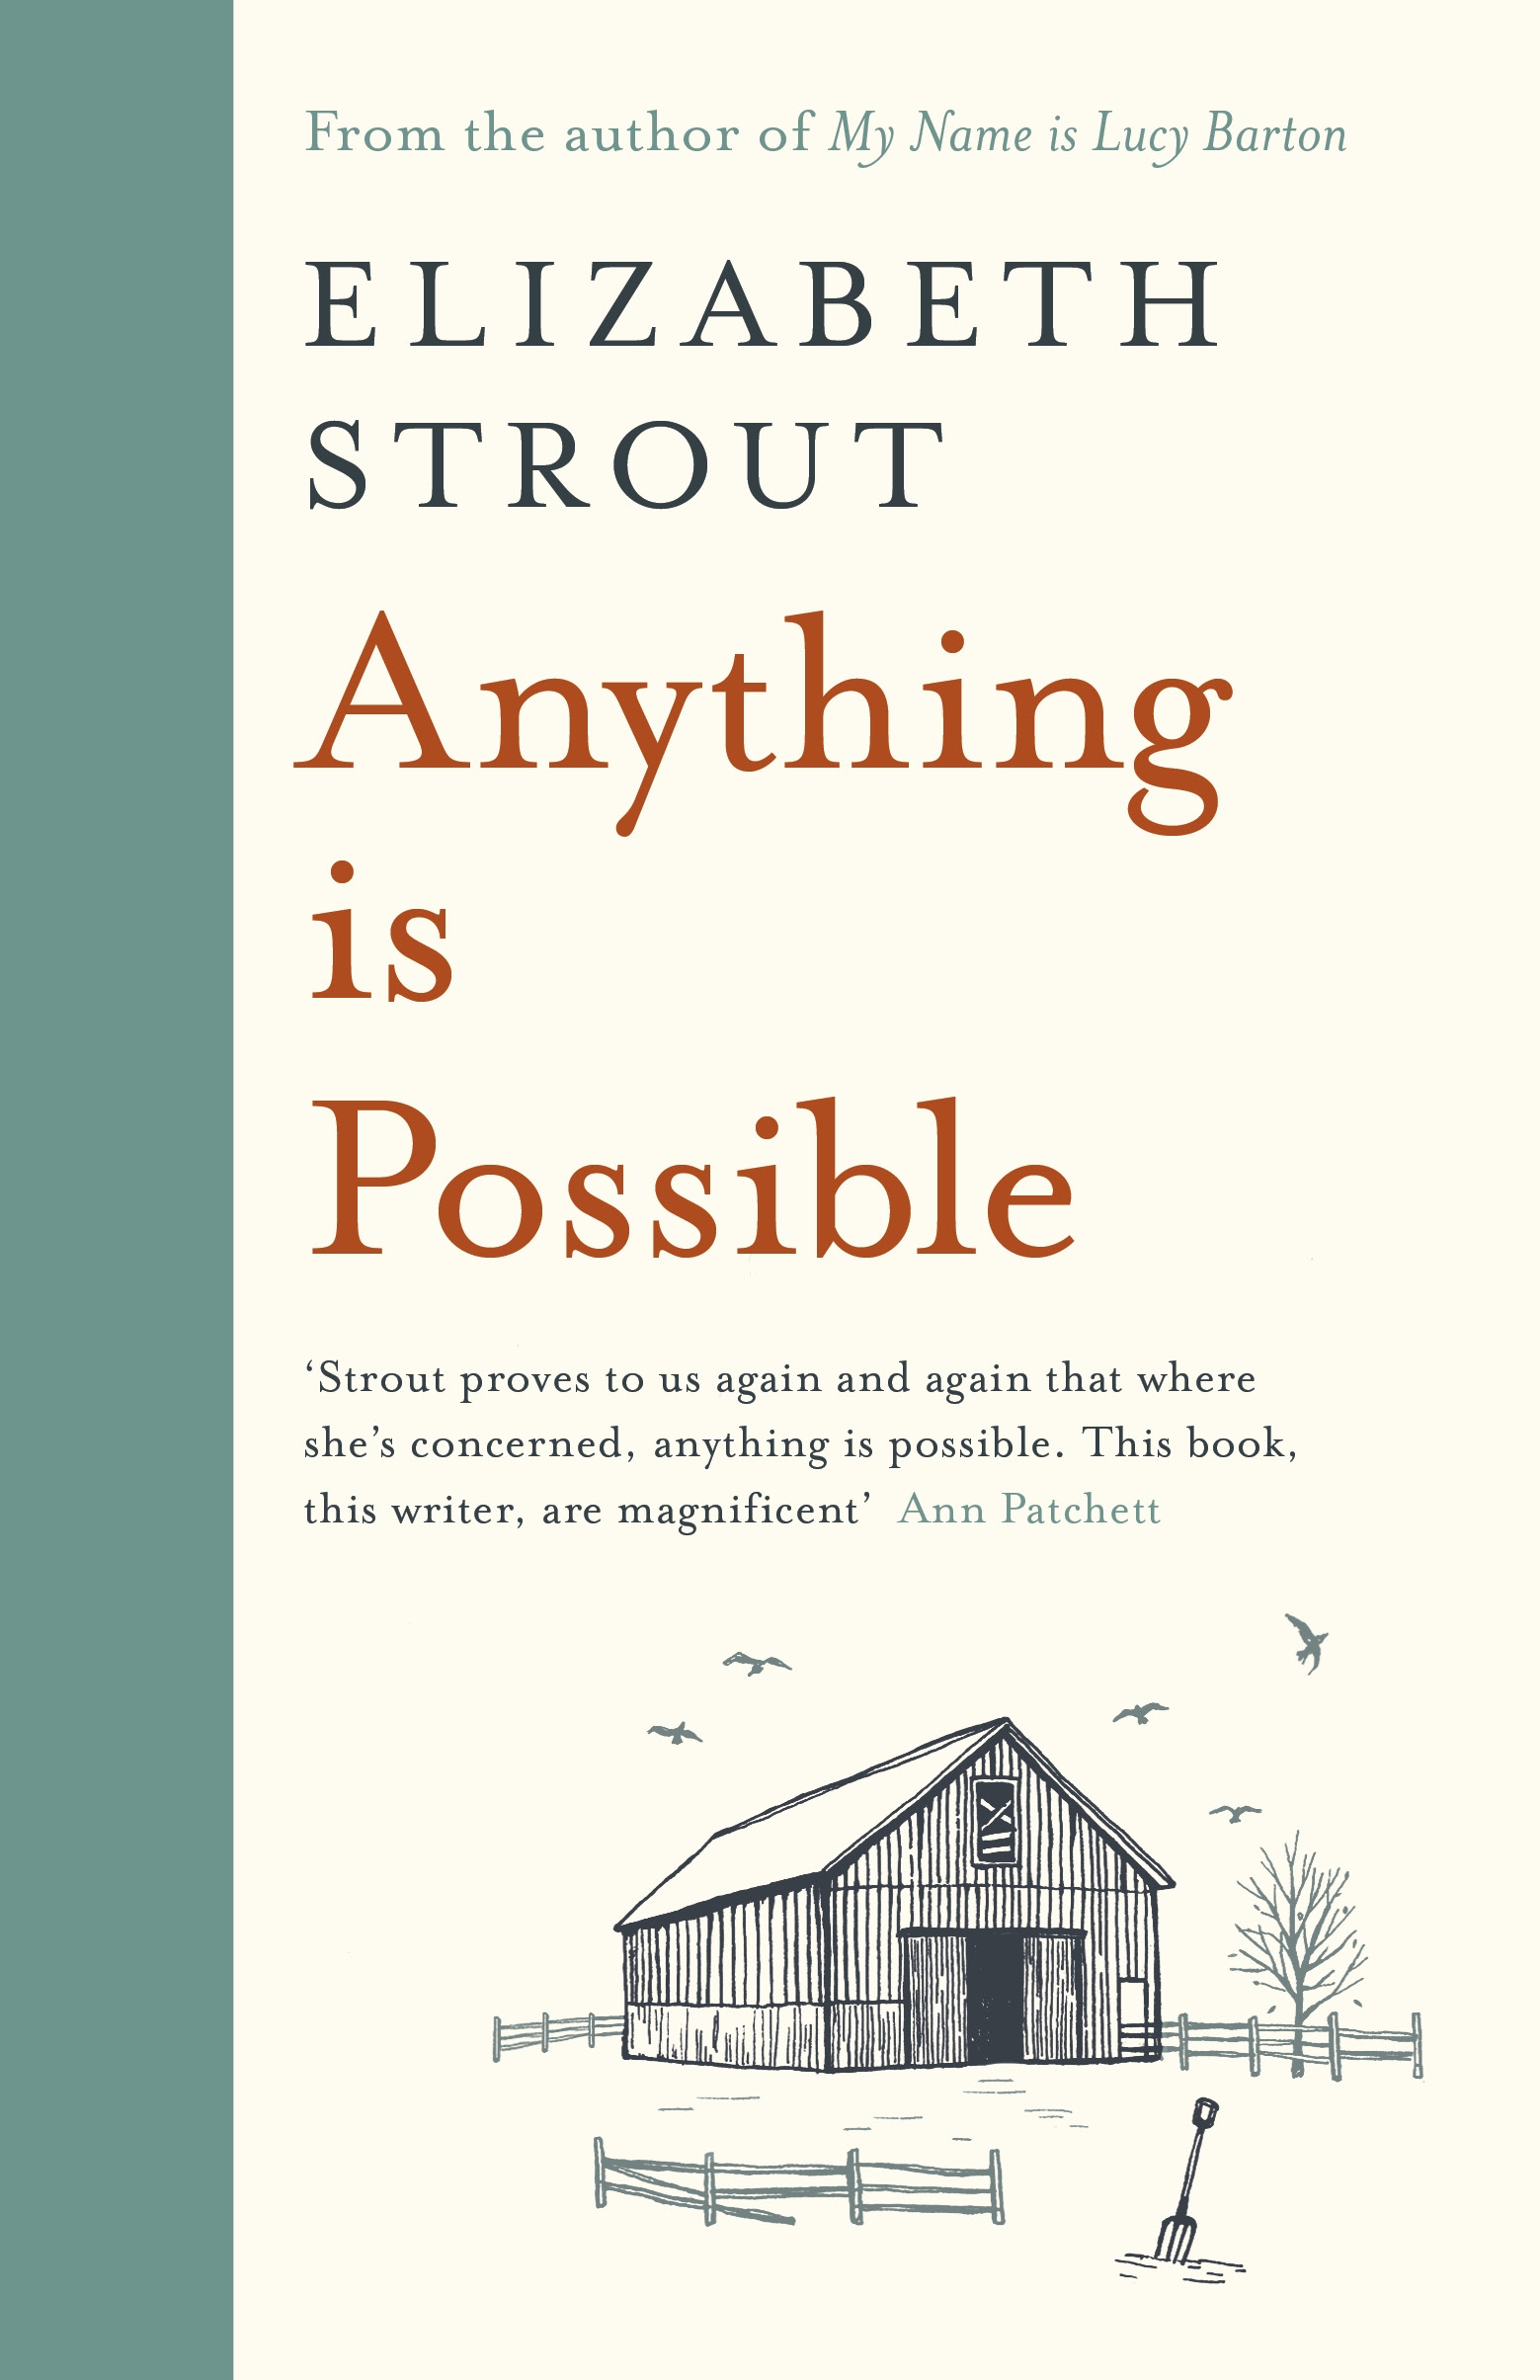 Anything is Possible Elizabeth Strout.jpg